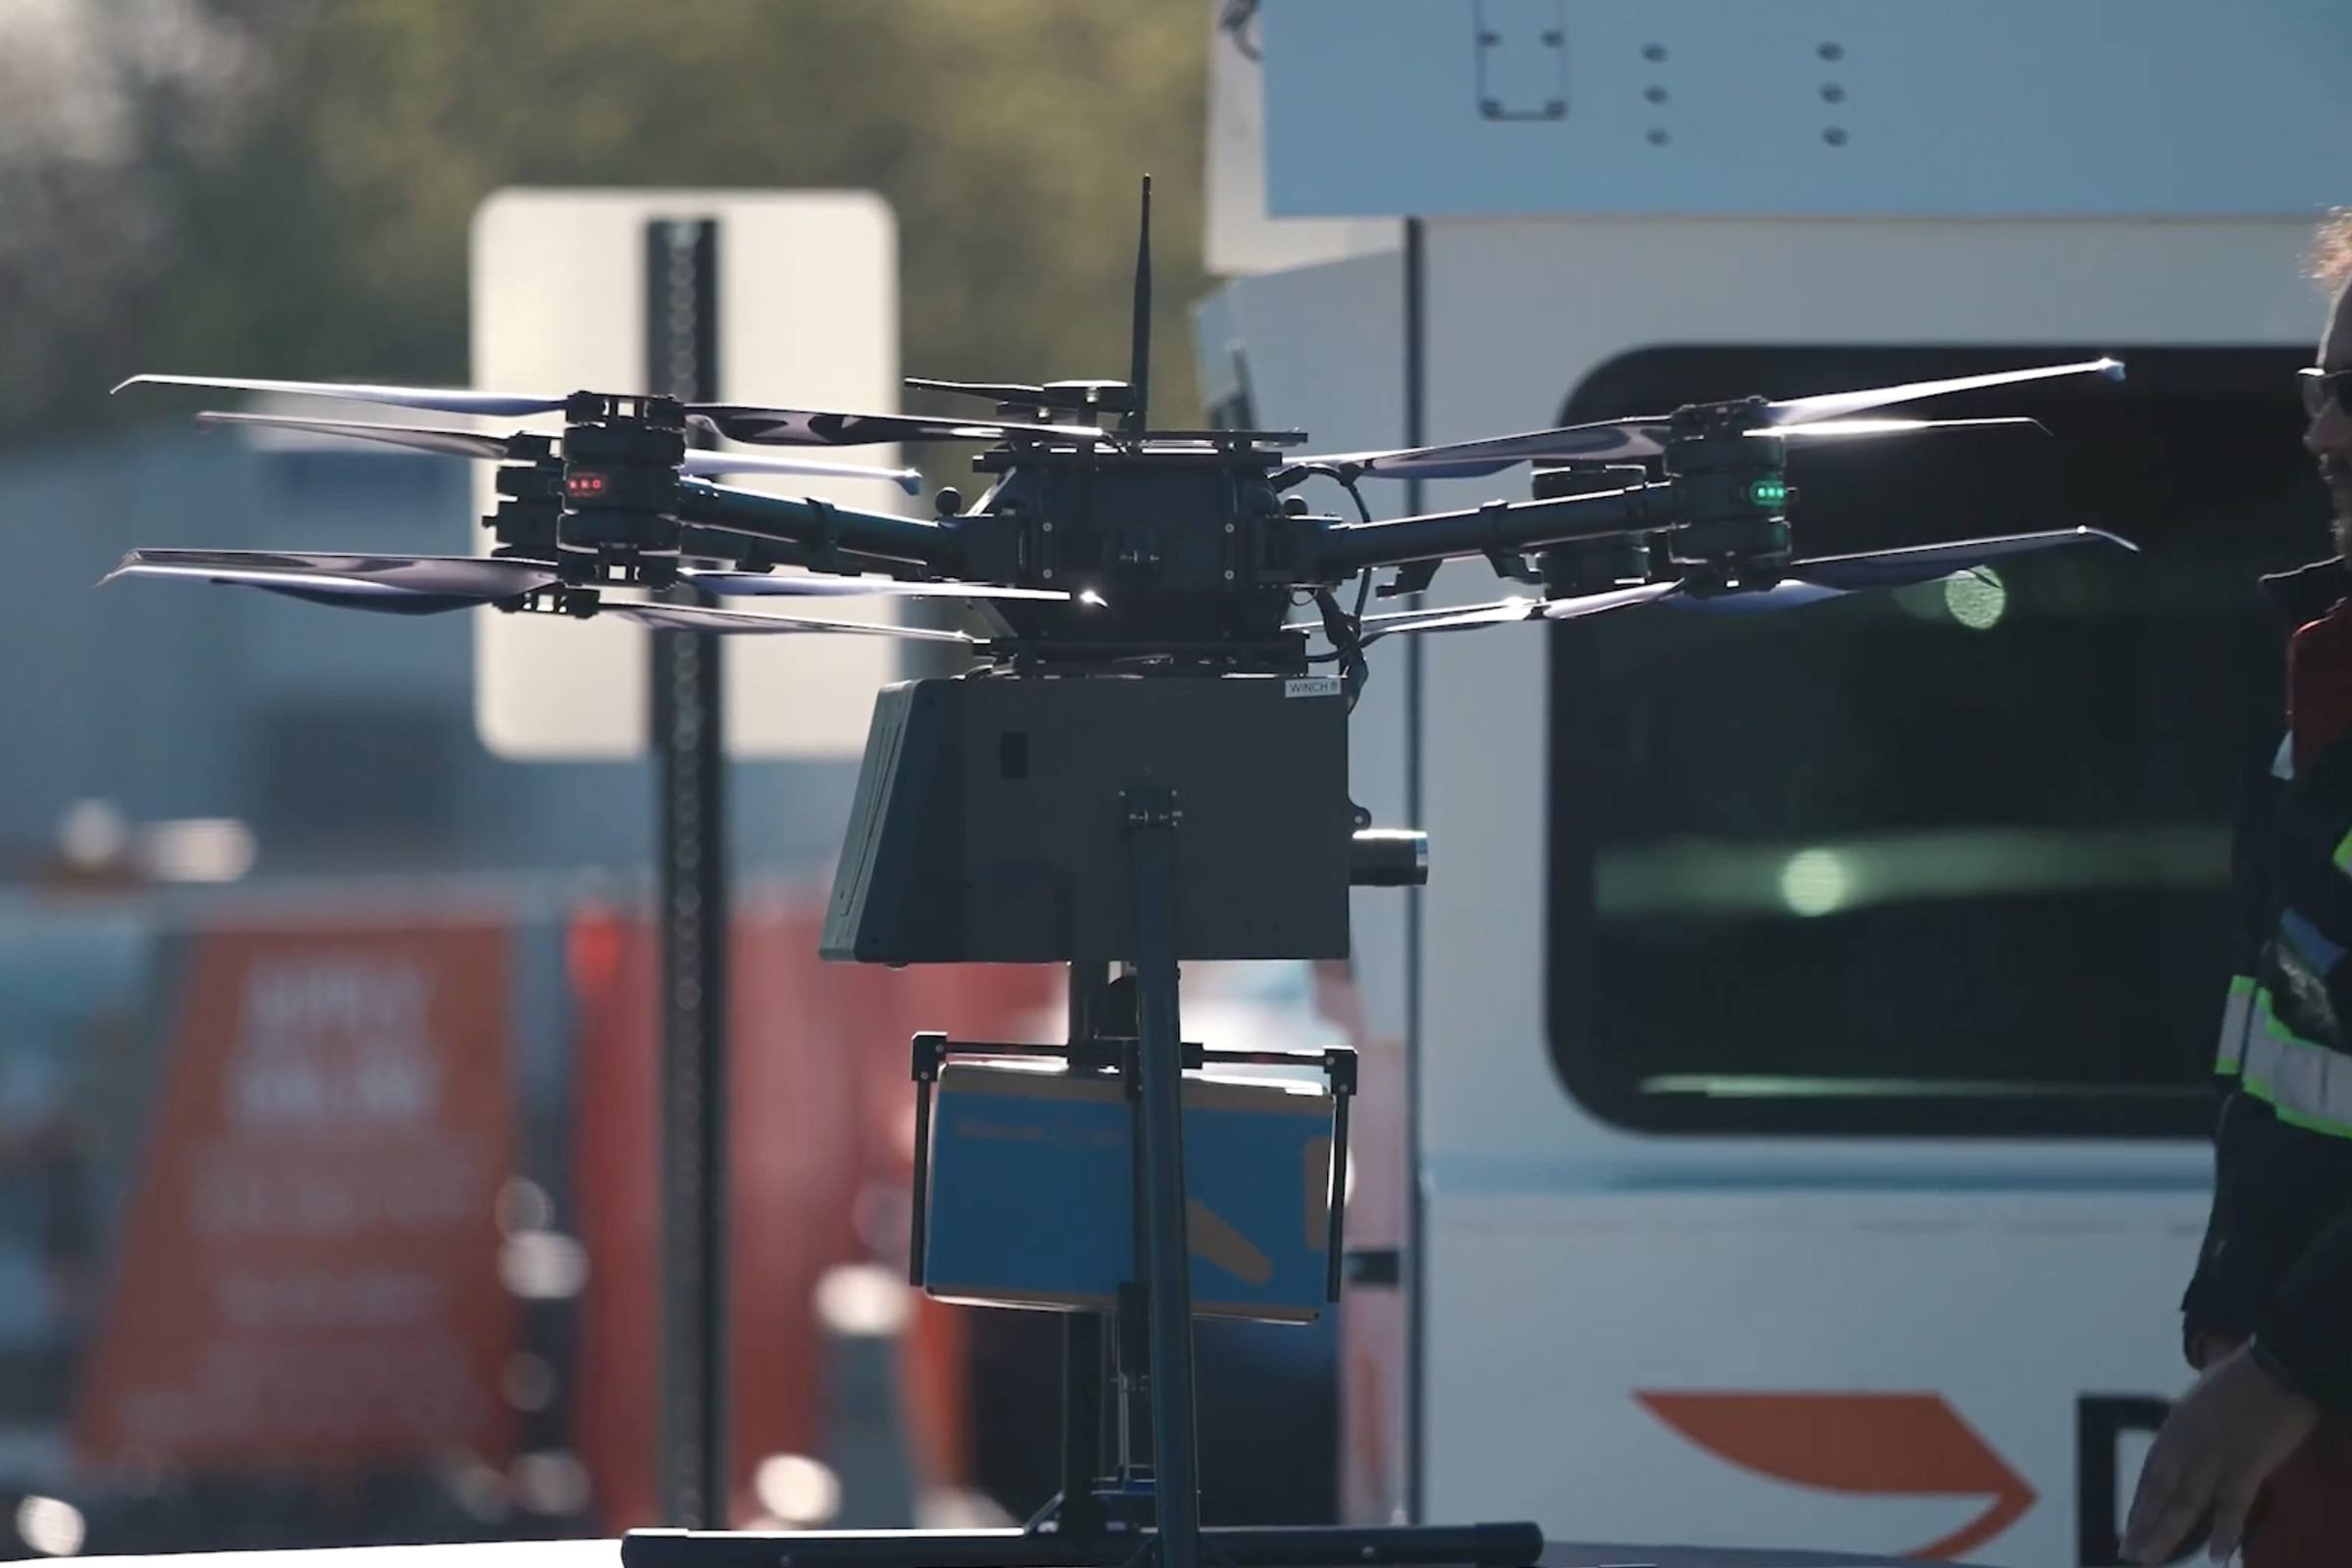 DroneUp can deliver packages within a mile-and-a-half radius of a Walmart.